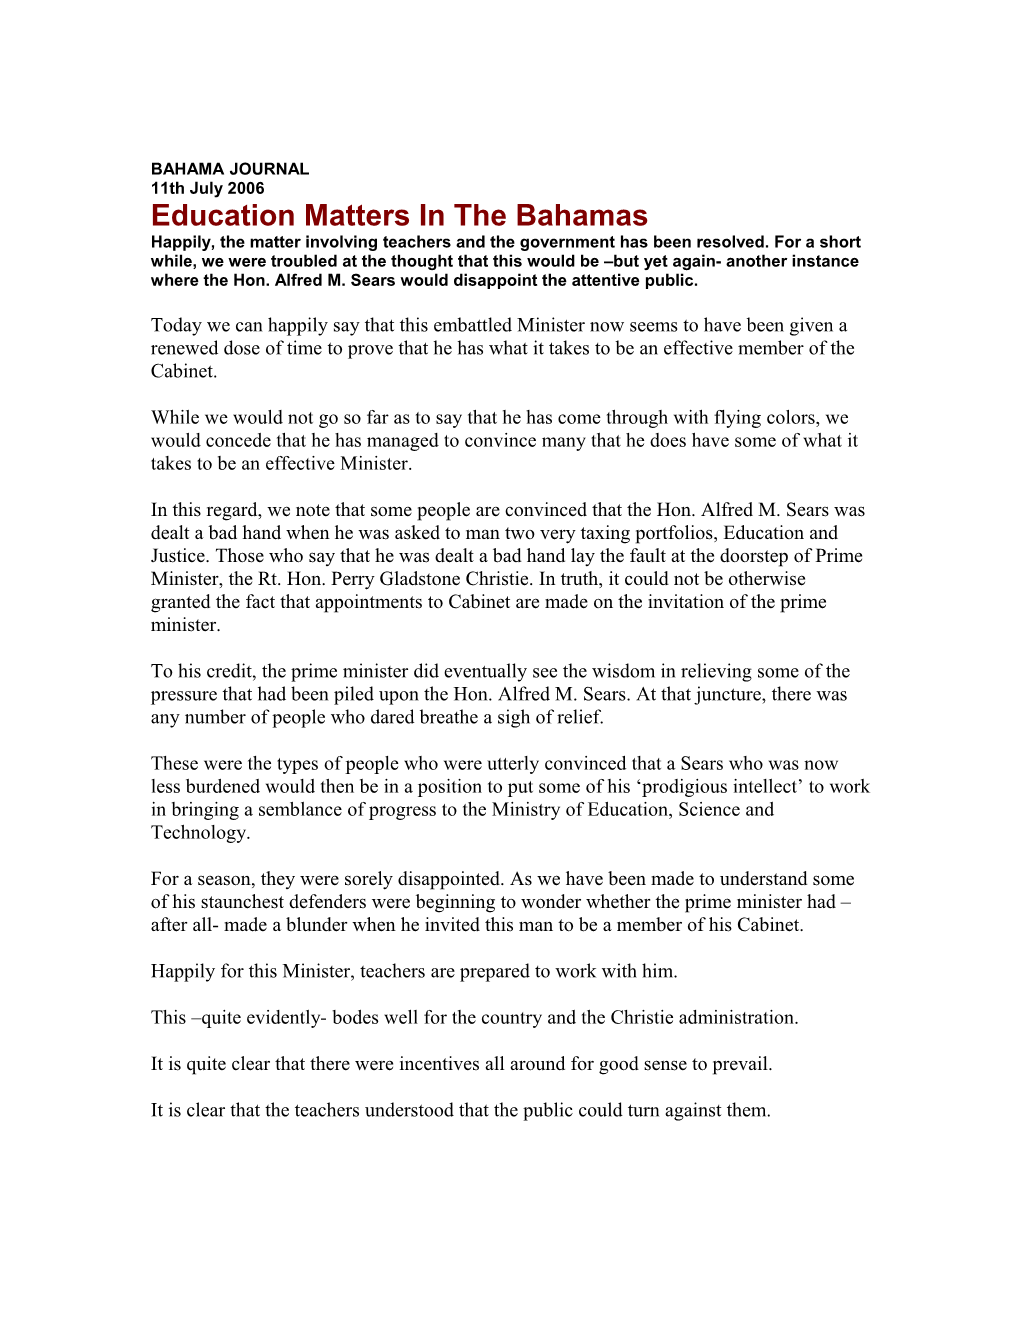 Education Matters in the Bahamas